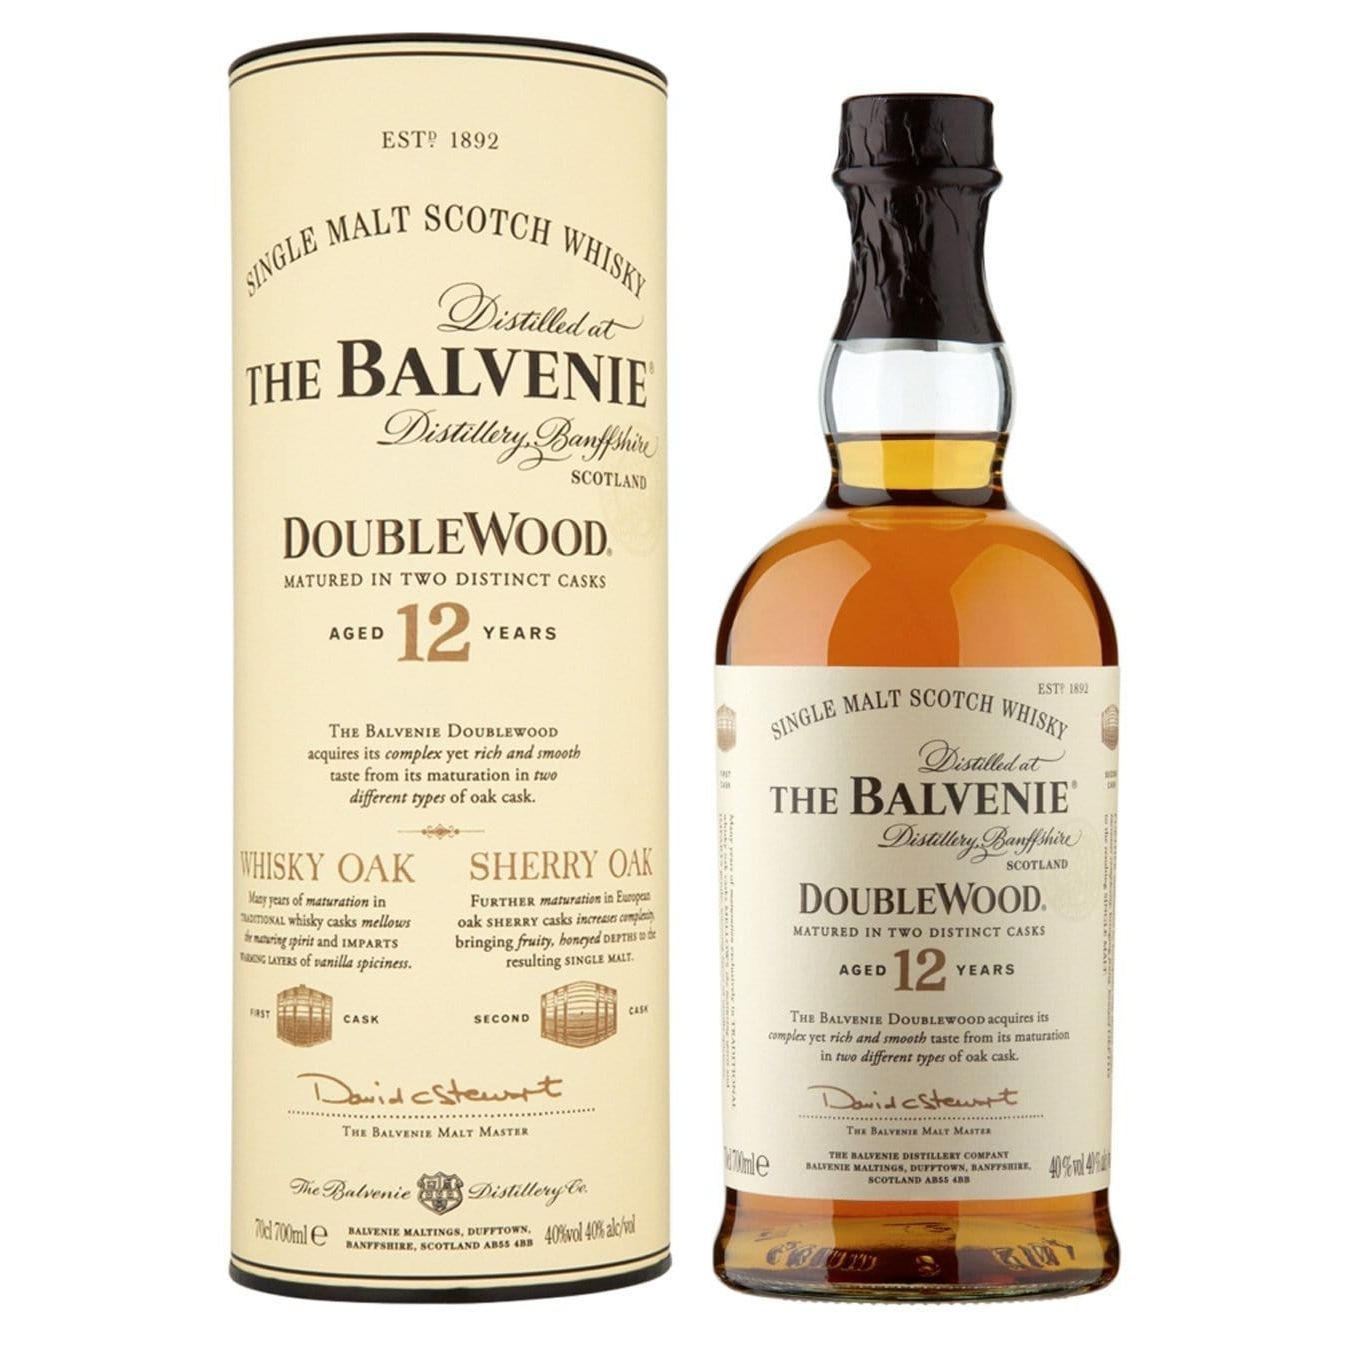 Picture of the balvenie doublewood 12 year scotch whisky